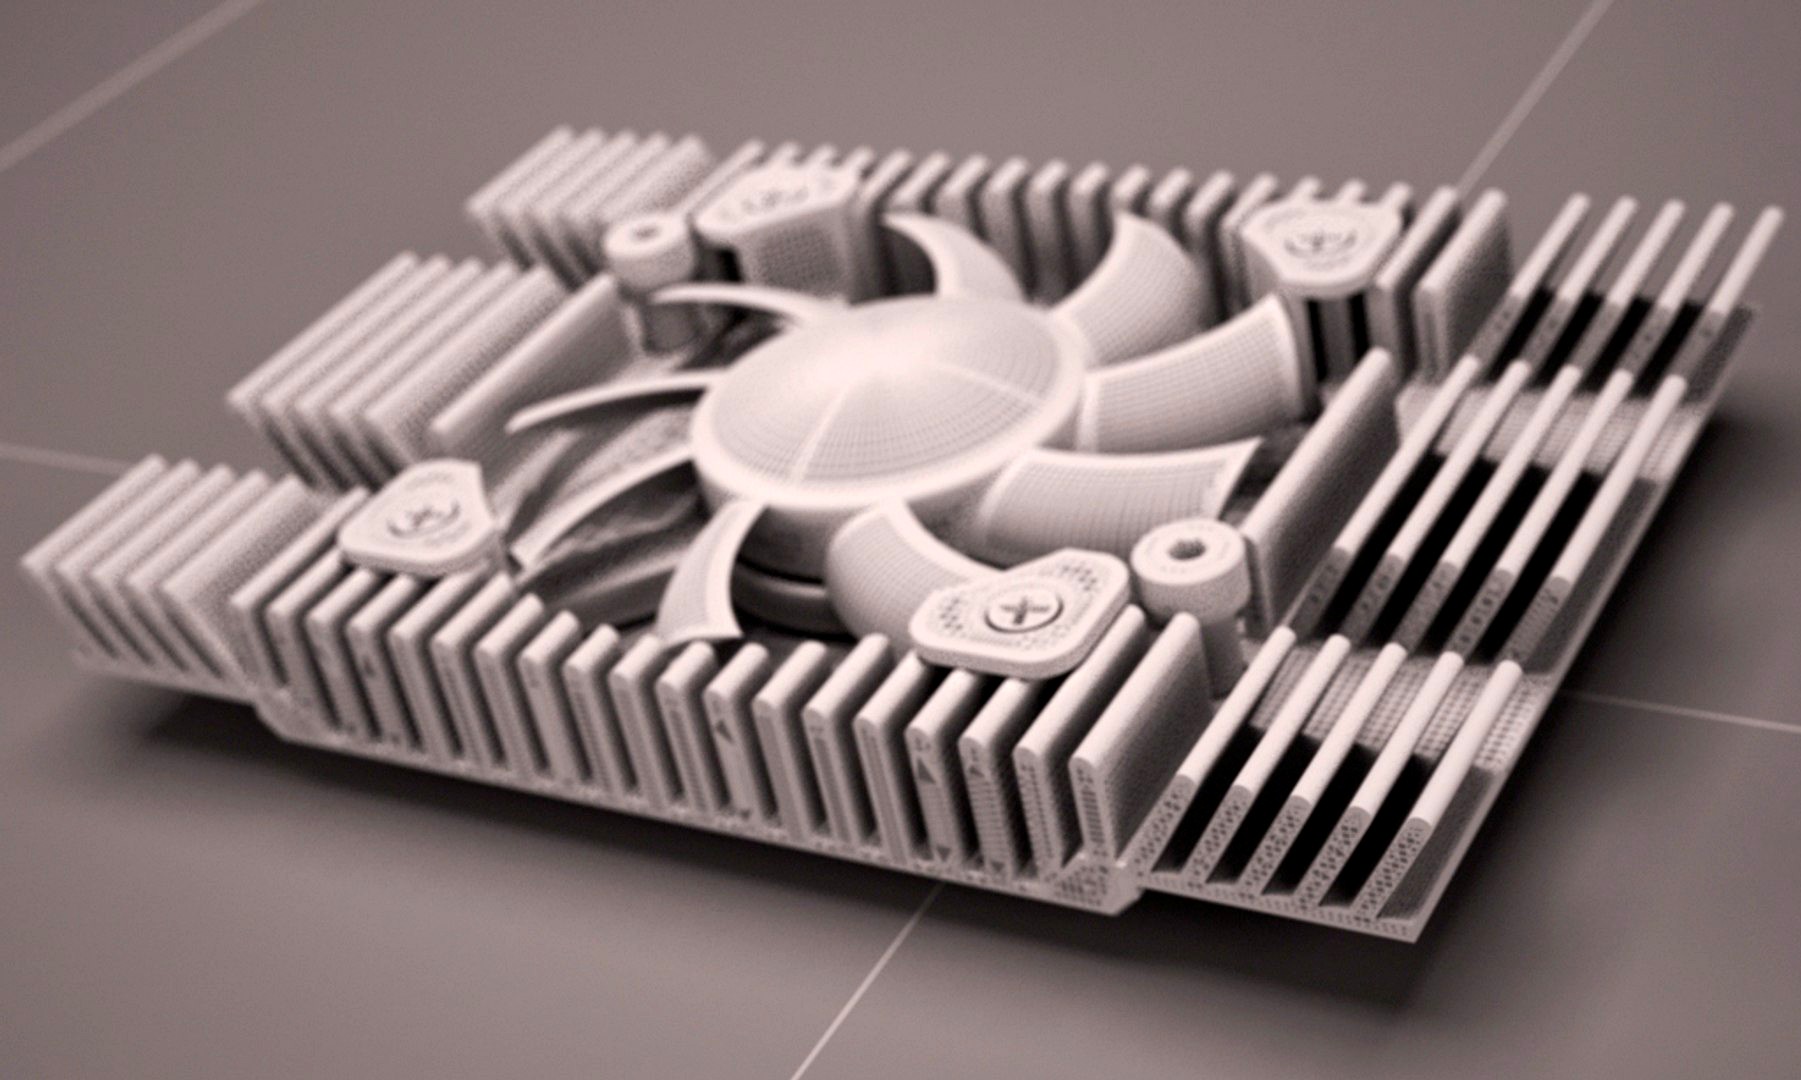 GRAPHICS CARD INTEGRATE COOLING FAN AND HEATSINK 2013 RAW EDITION